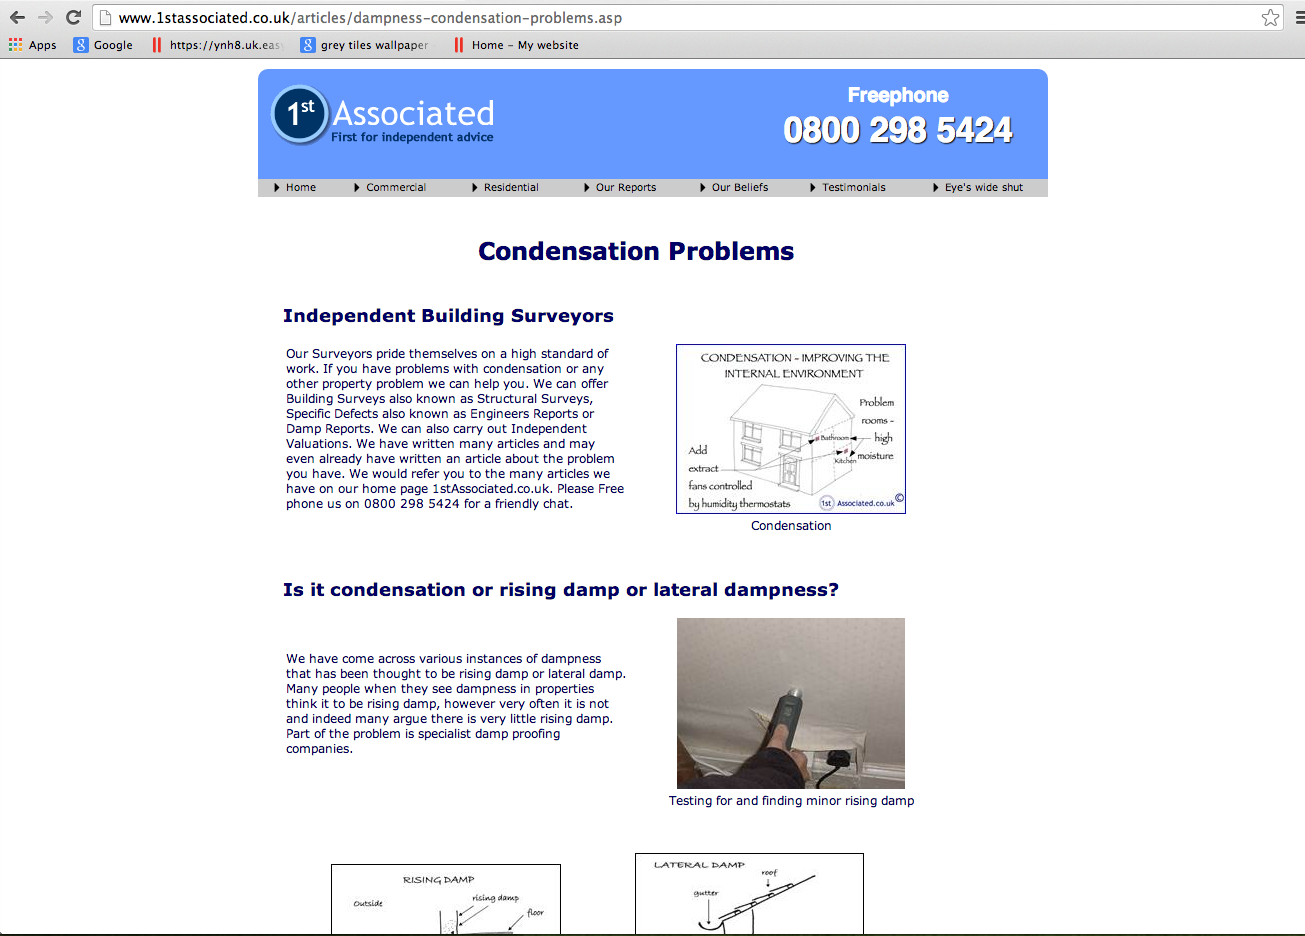 1stassociated.co.uk's Article -  Dampness Condensation Problems